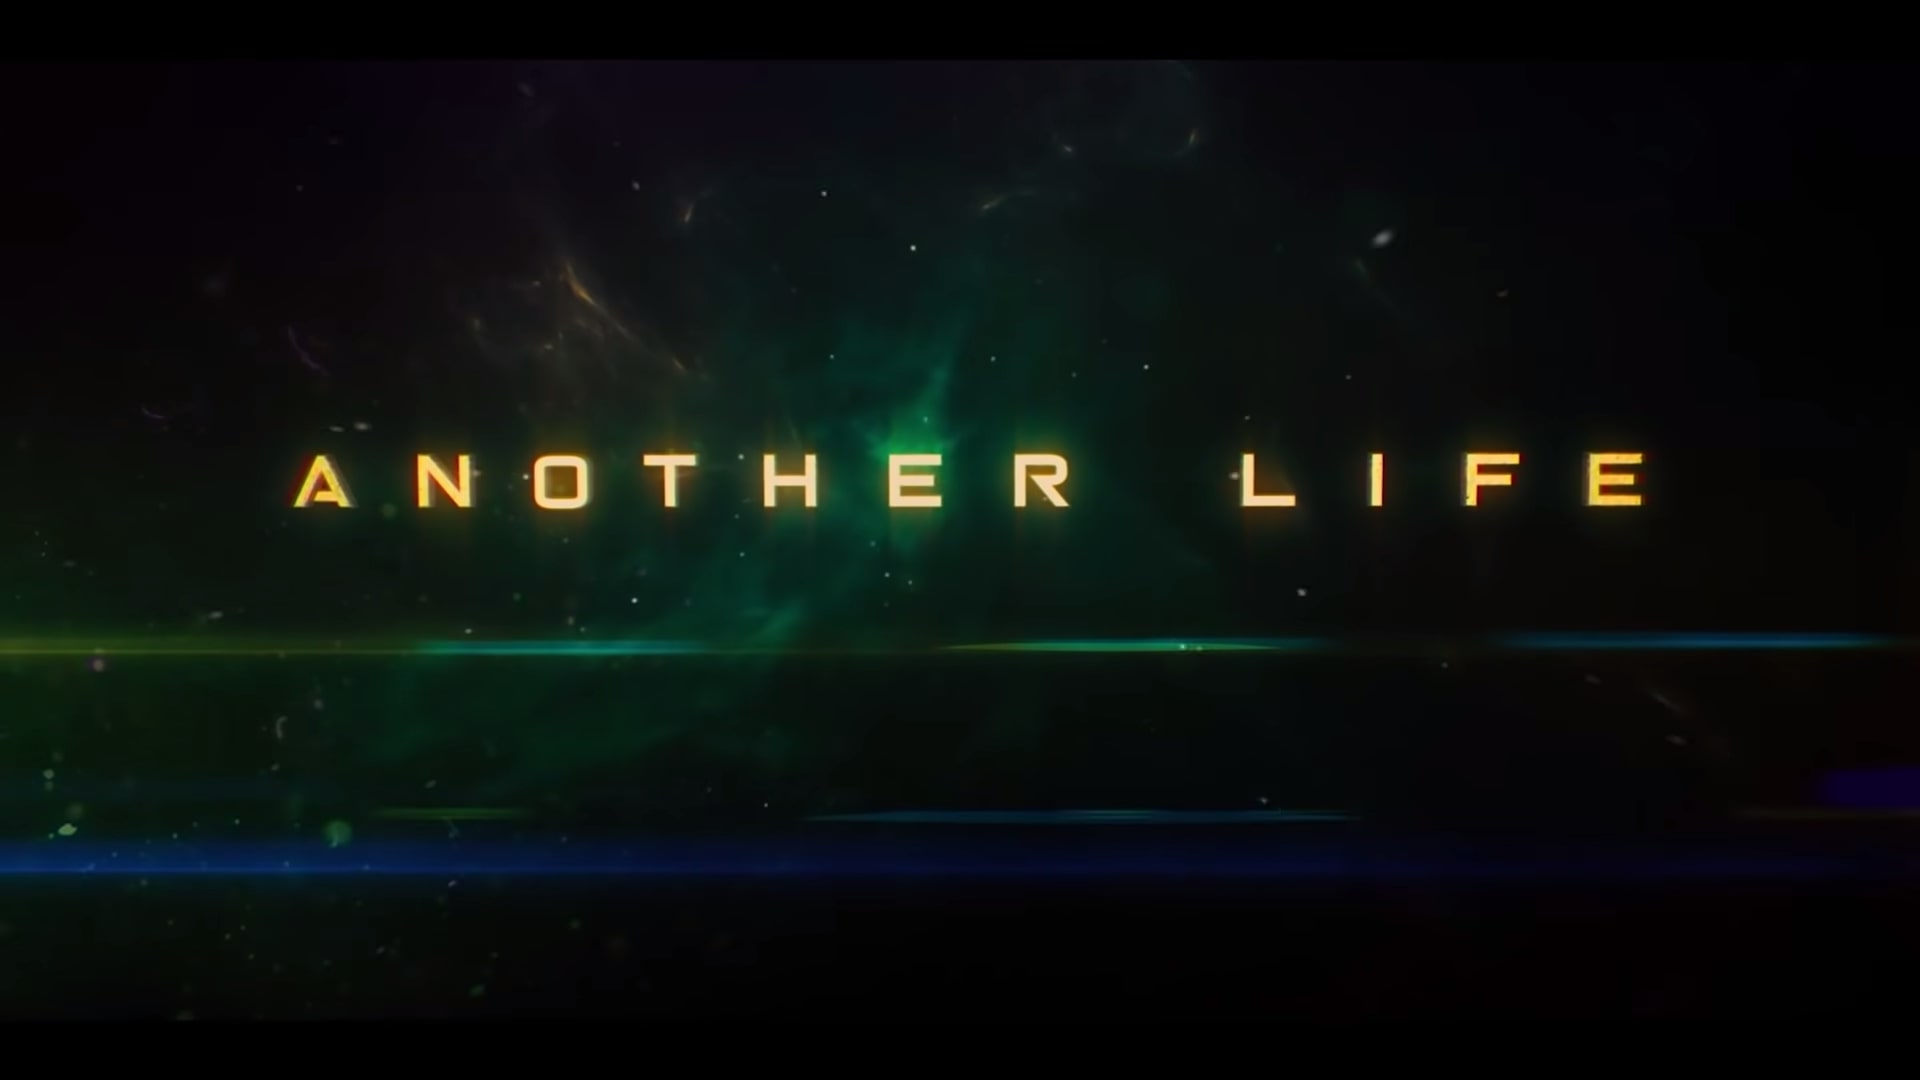 Netflix Another Life Season 2 Trailer, Coming to Netflix in October 2021